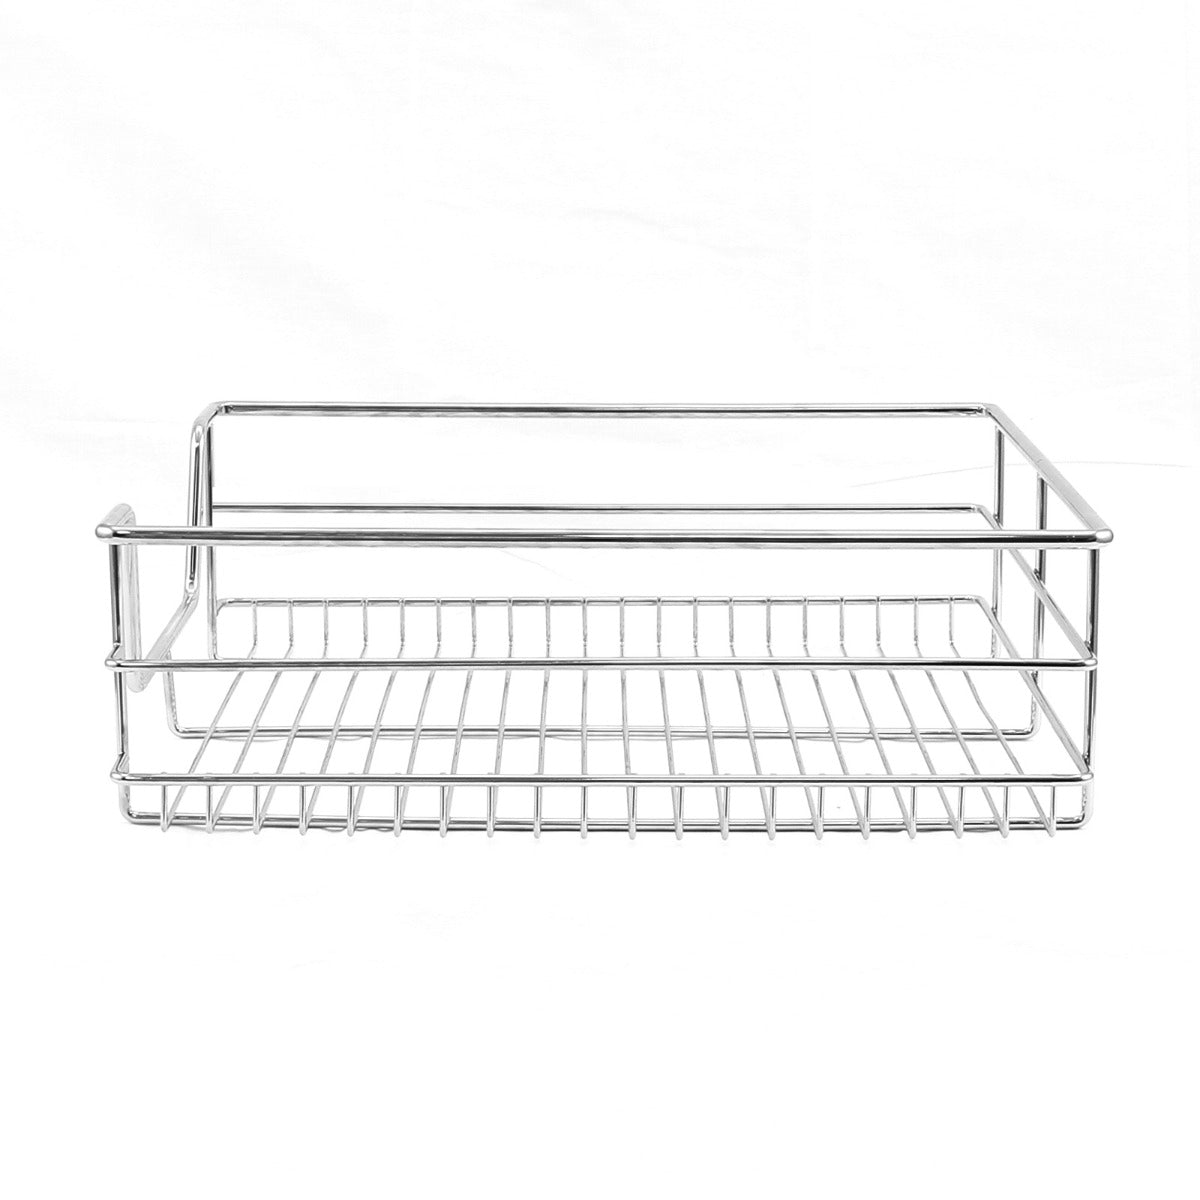 2 x KuKoo Kitchen Pull Out Storage Baskets – 400mm Wide Cabinet